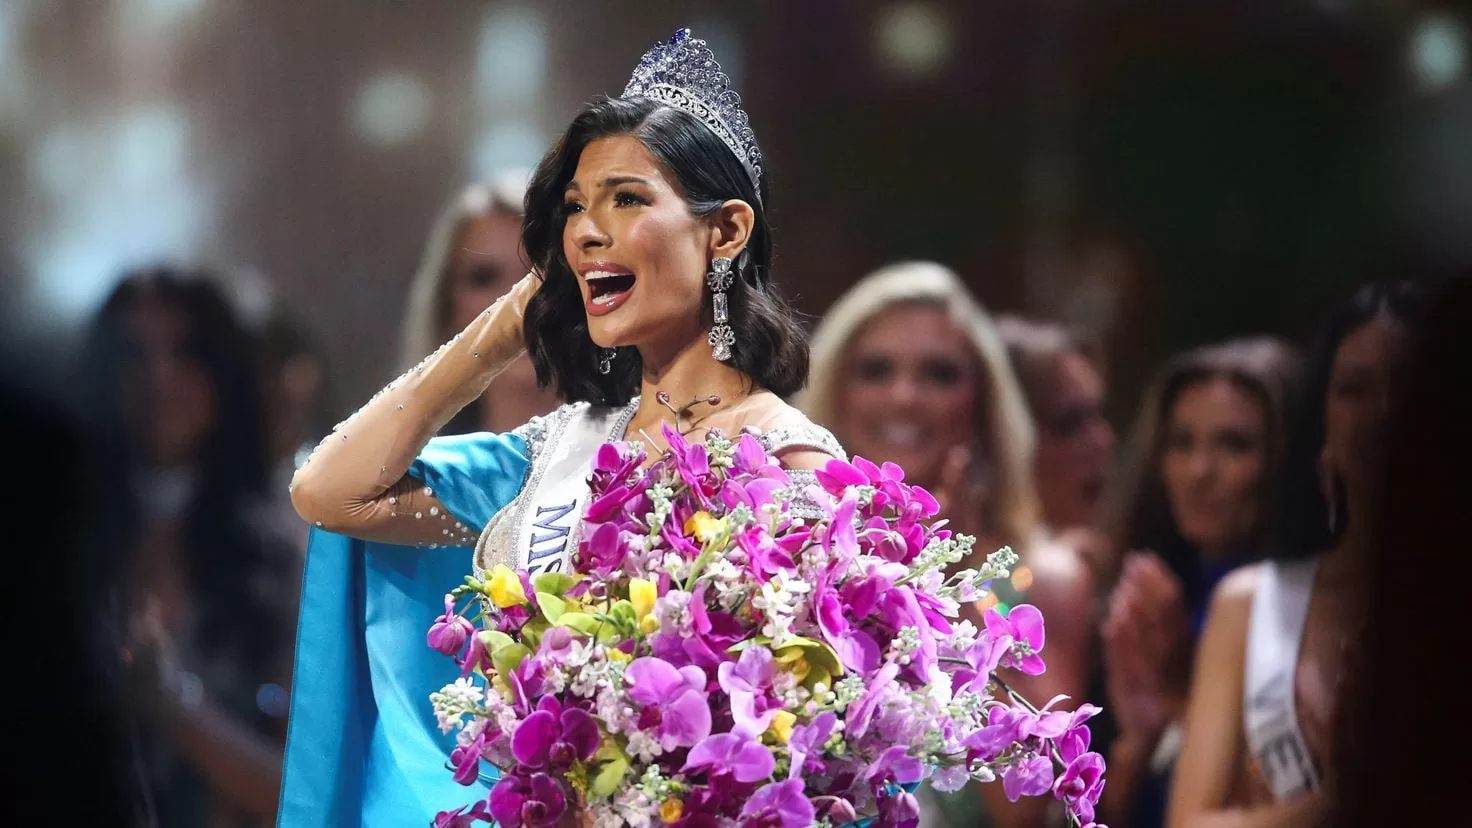 Miss Universe: How many times has a Central American or Caribbean woman won?
